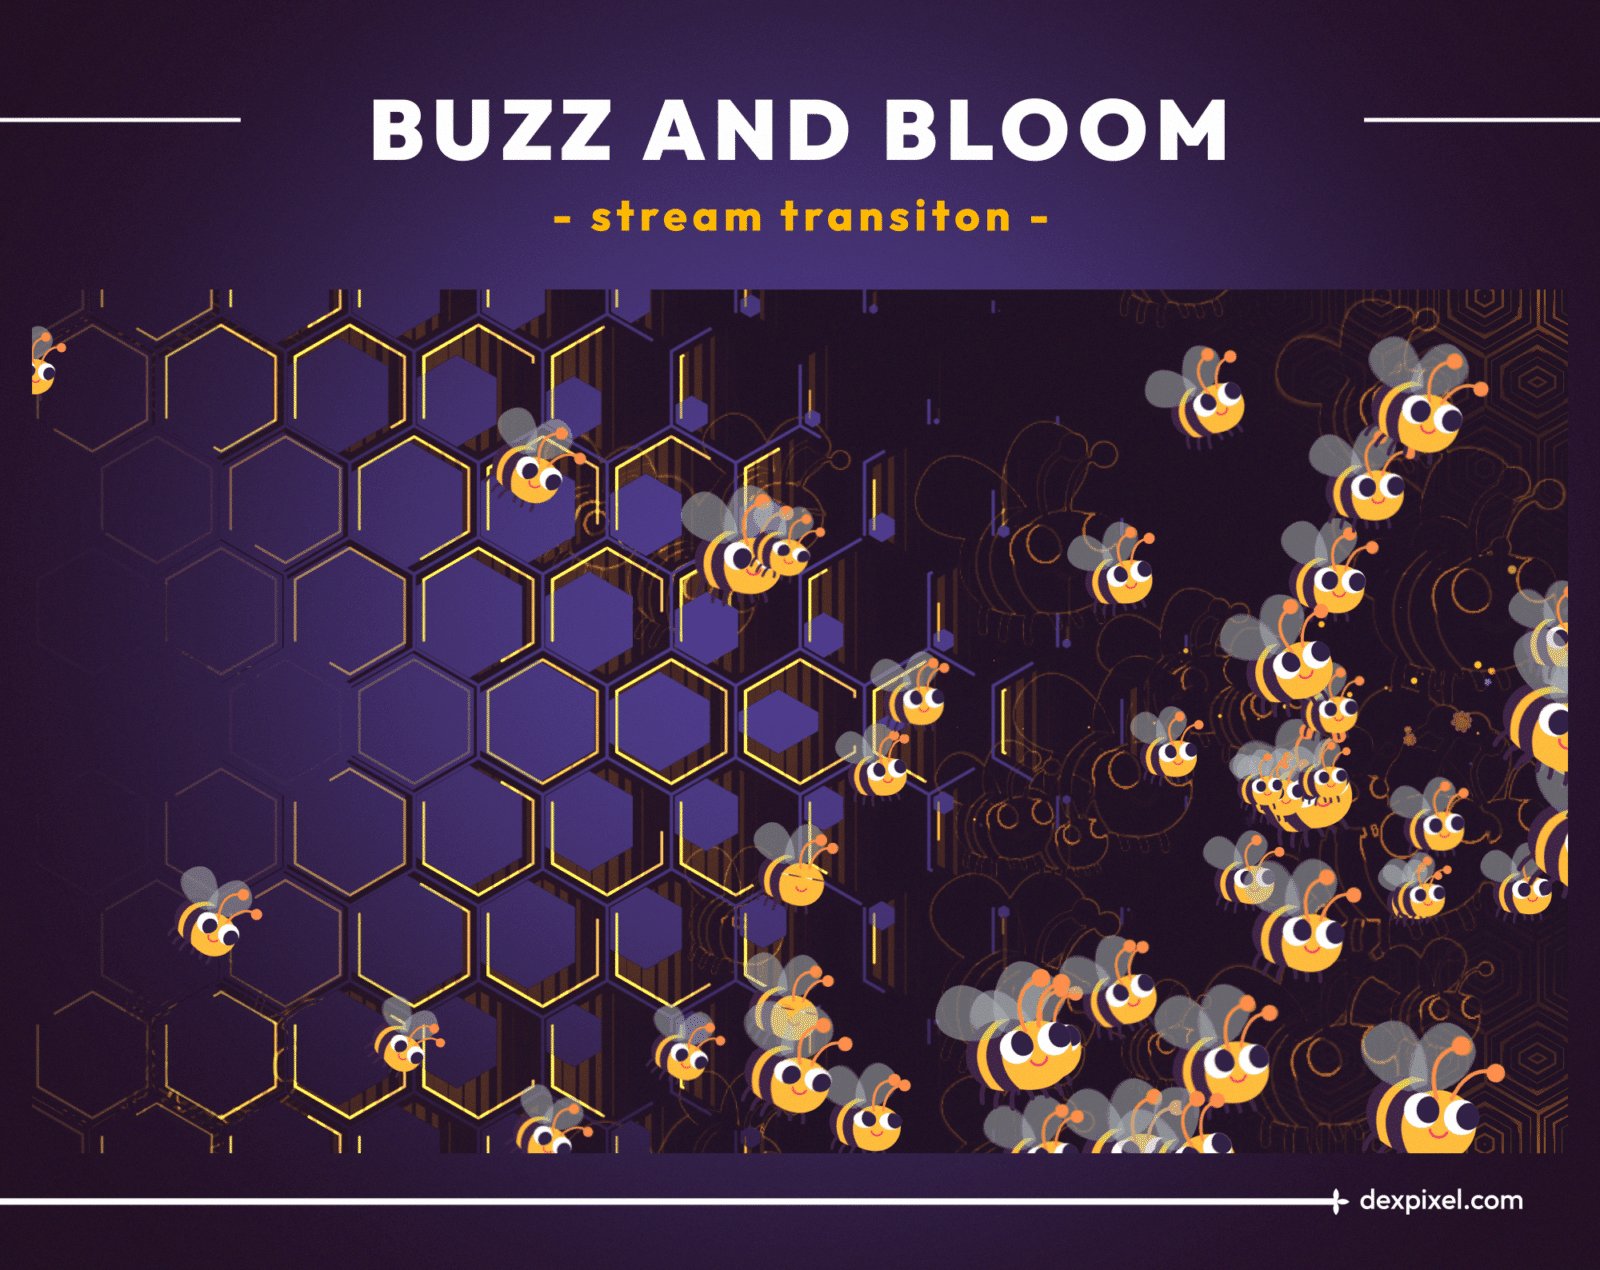 Buzz and Bloom Animated Stream Transition 3